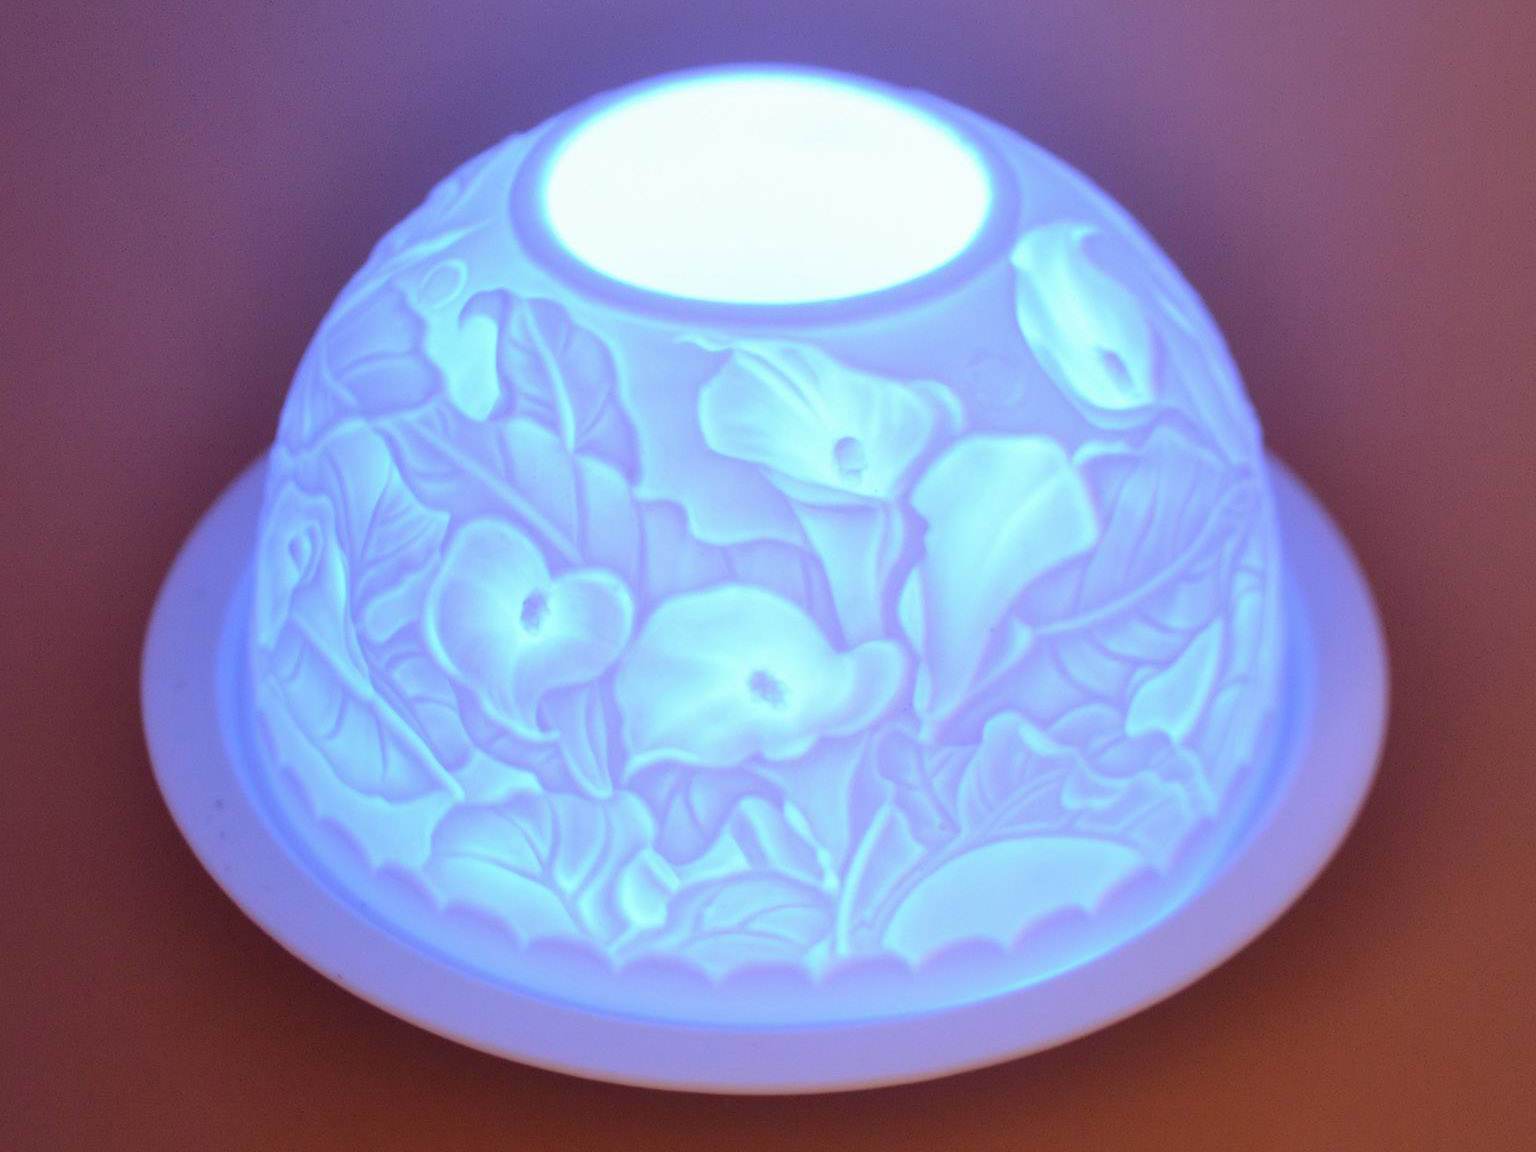 Dome light candle holder